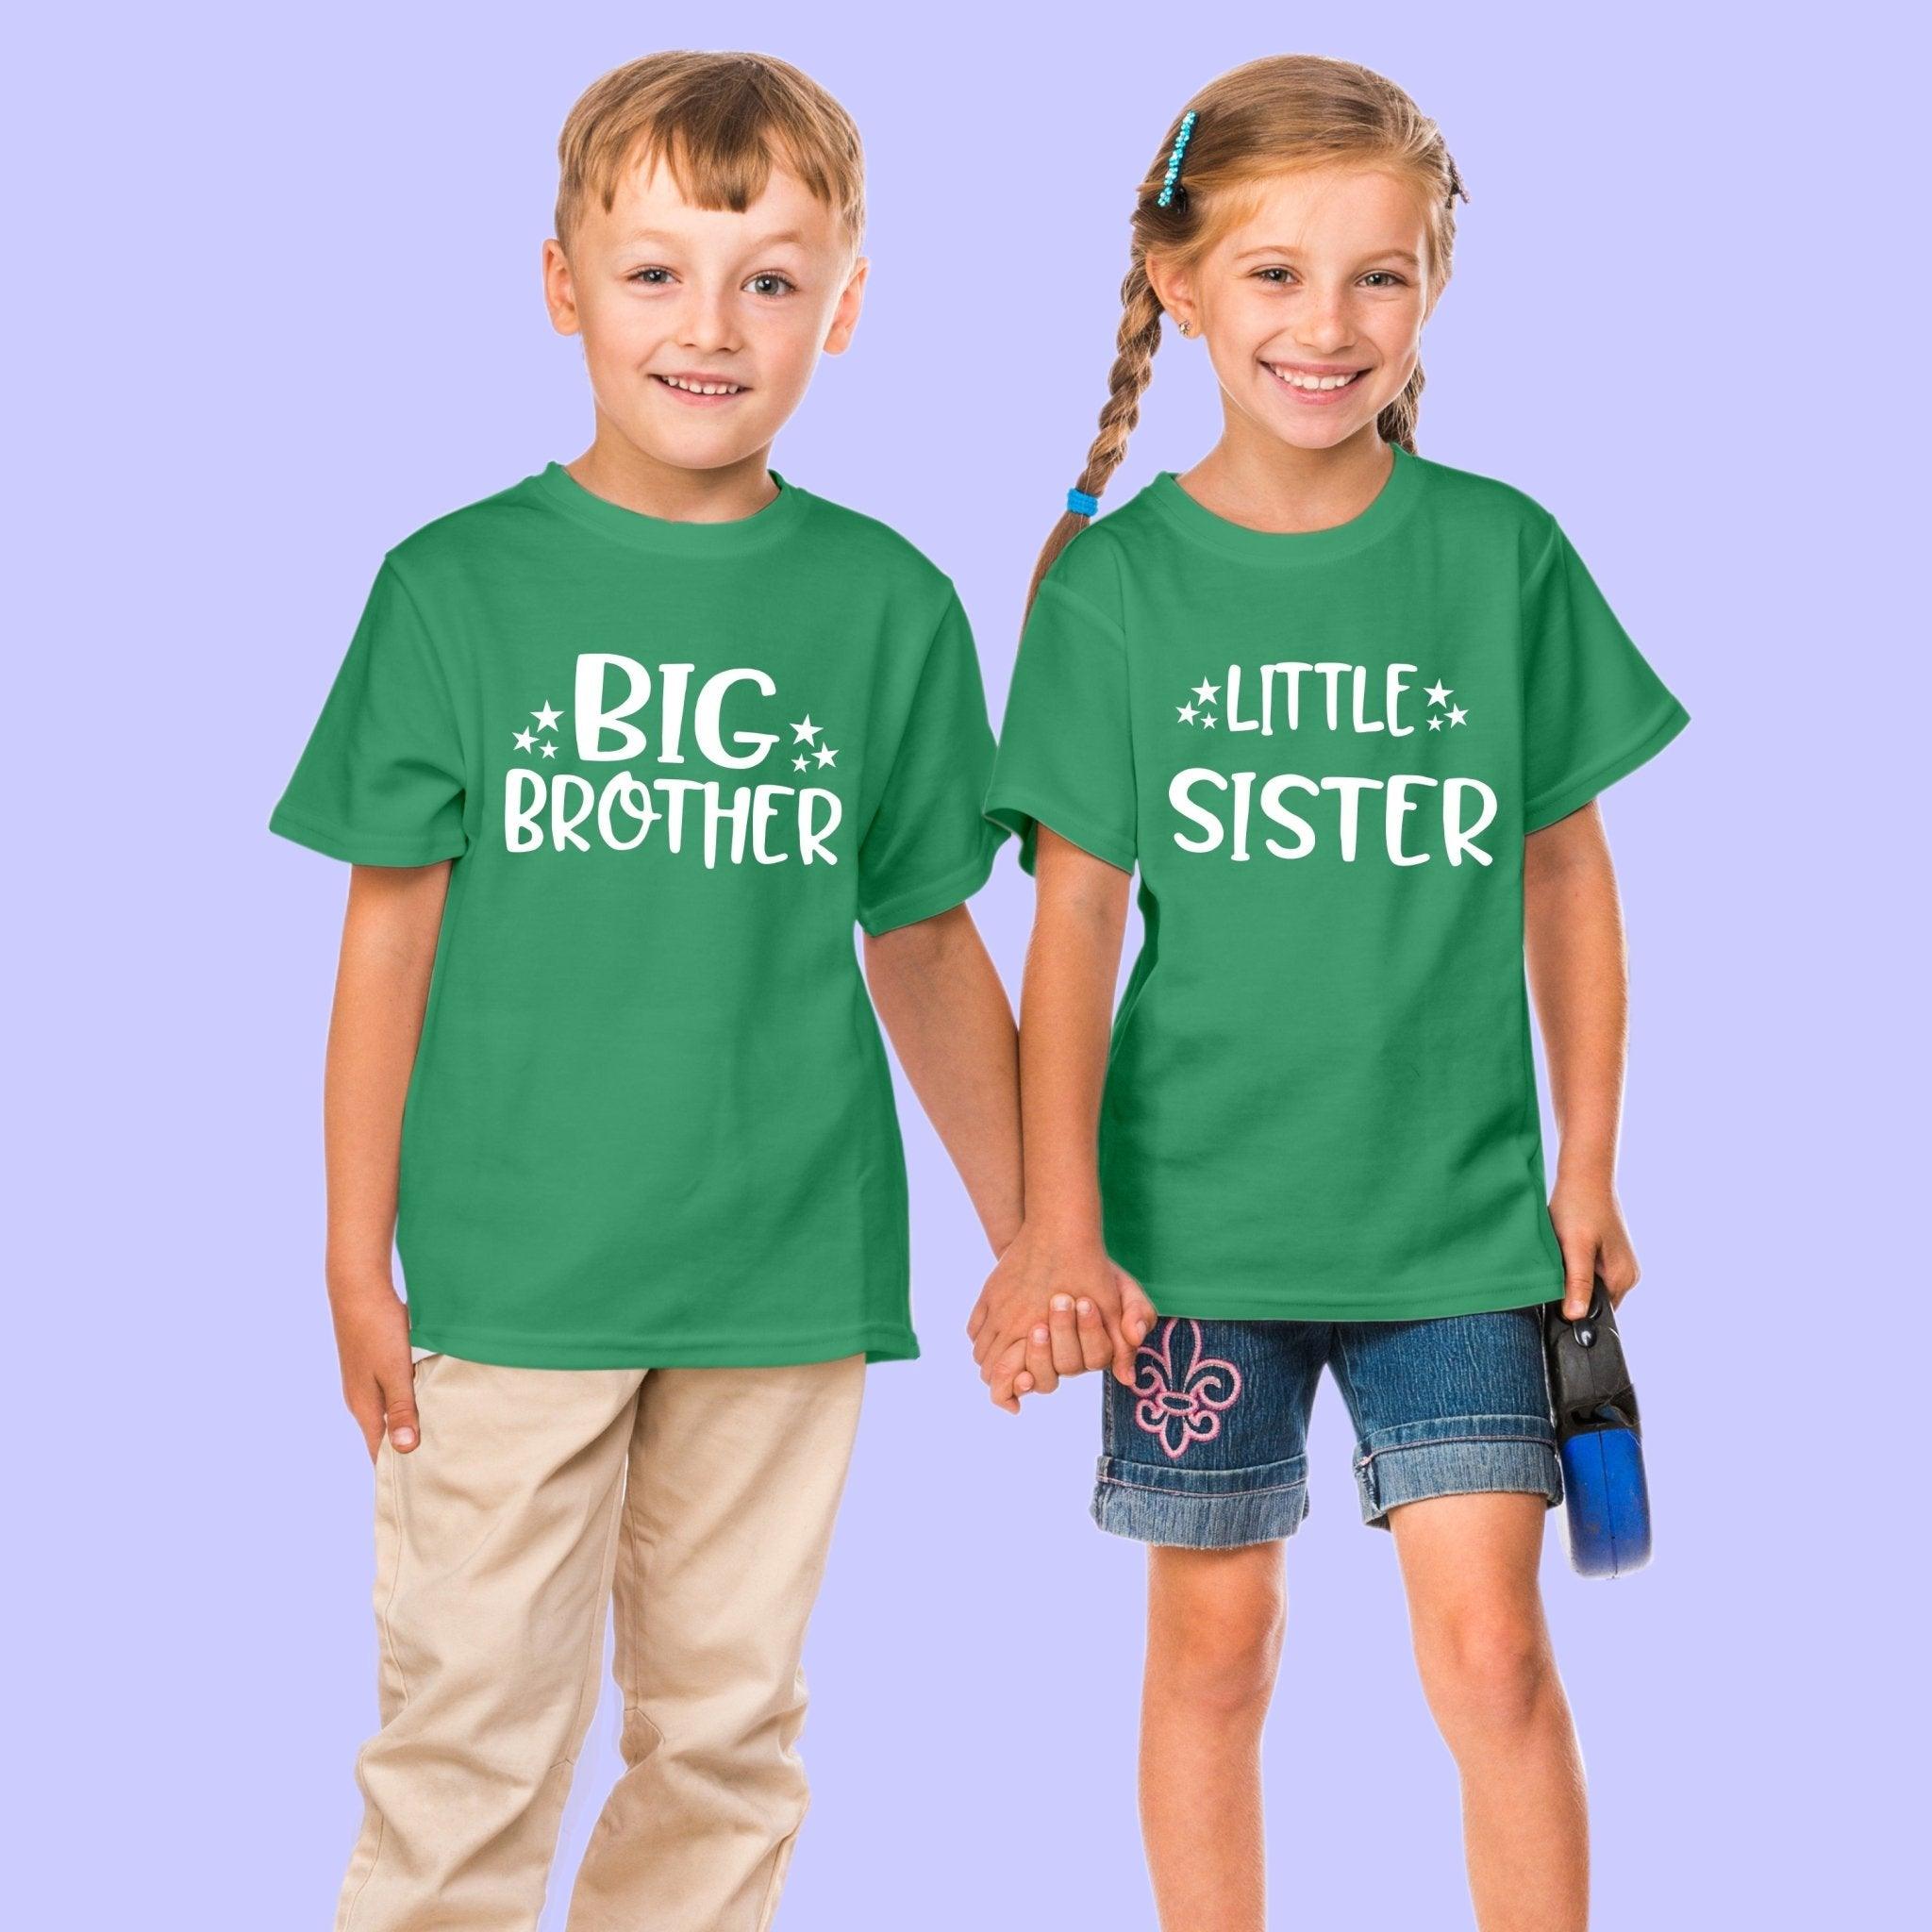 Sibling T Shirt for Kids Brother and Sister in Green Colour - Big Brother Little Sister Variant